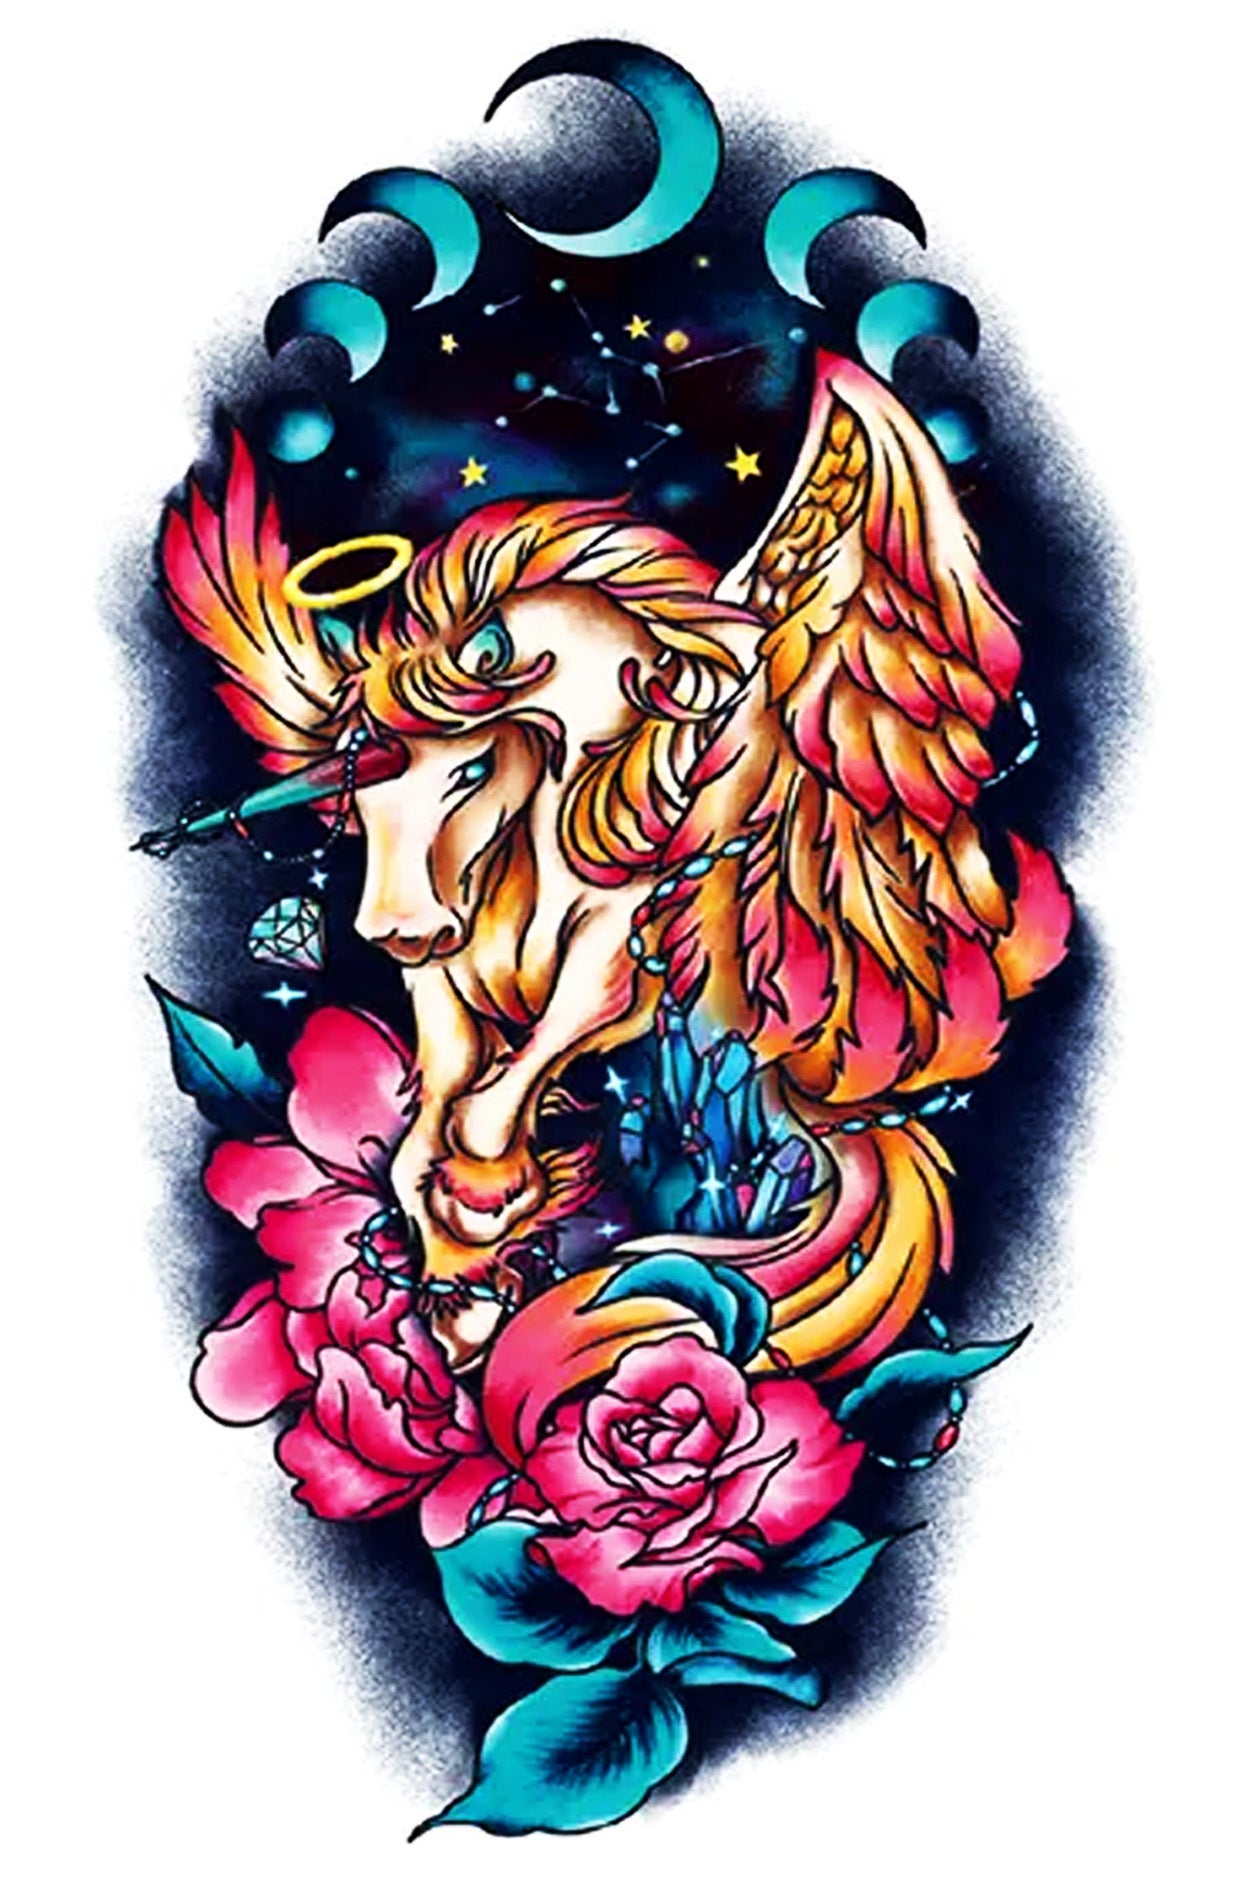 A magical, mystical white unicorn is a symbol of purity, healing, and innocence. The moon’s phases over the unicorn are a restoration of balance to life, and the full roses below are presented in gratitude and admiration for the unicorn. This colorful artwork will be genuinely magical on any arm or leg.  Creatively wear this artwork on any part of your body, arm, leg, torso, or shoulder.